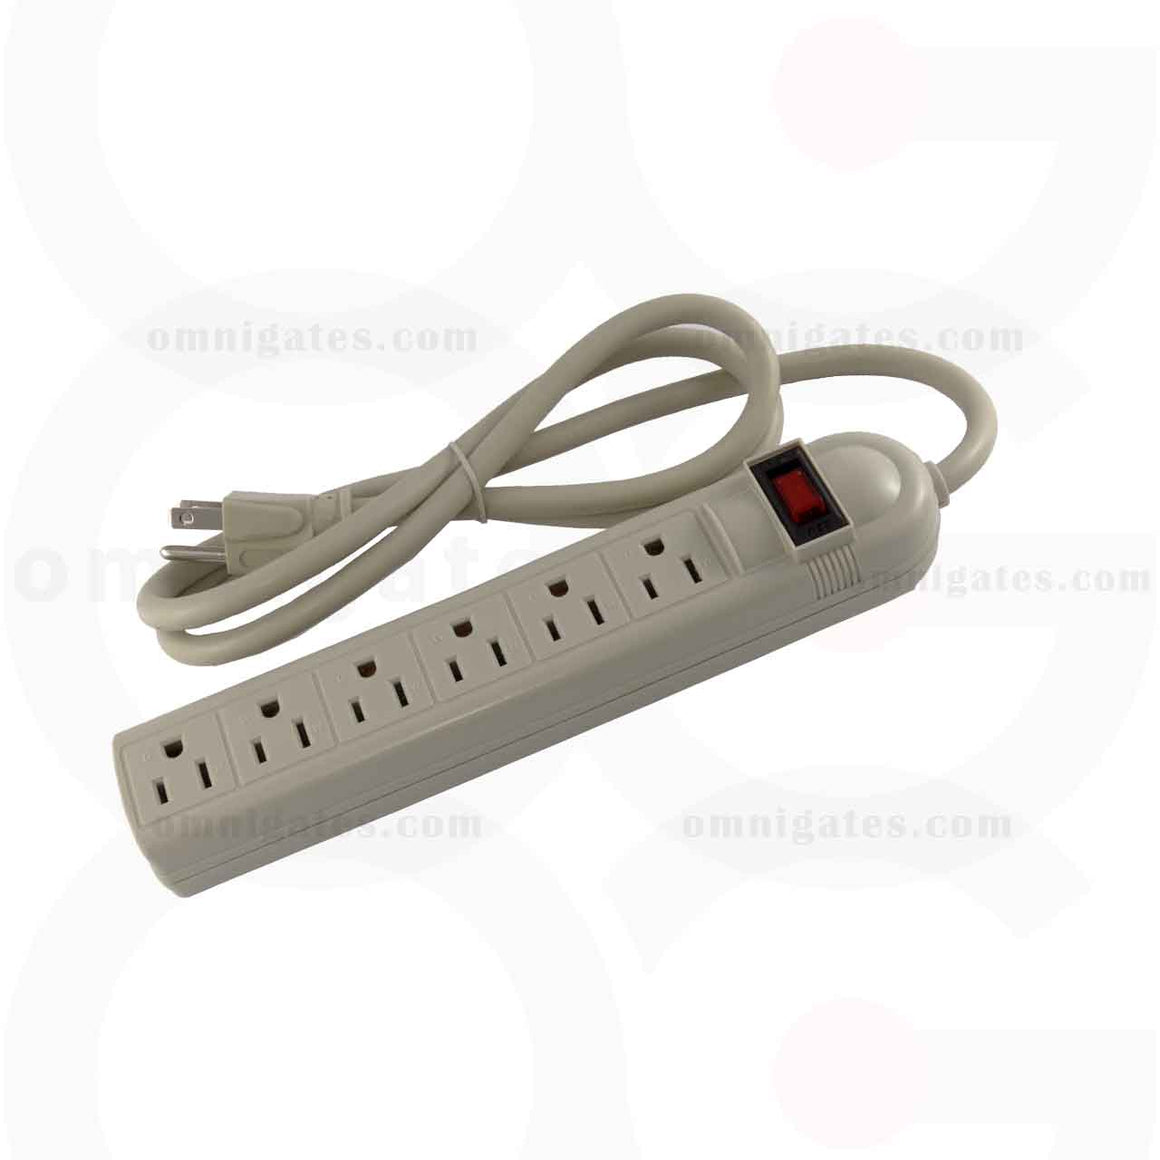 6 Outlet Surge Protector with Built-in 15A Safety Circuit Breaker